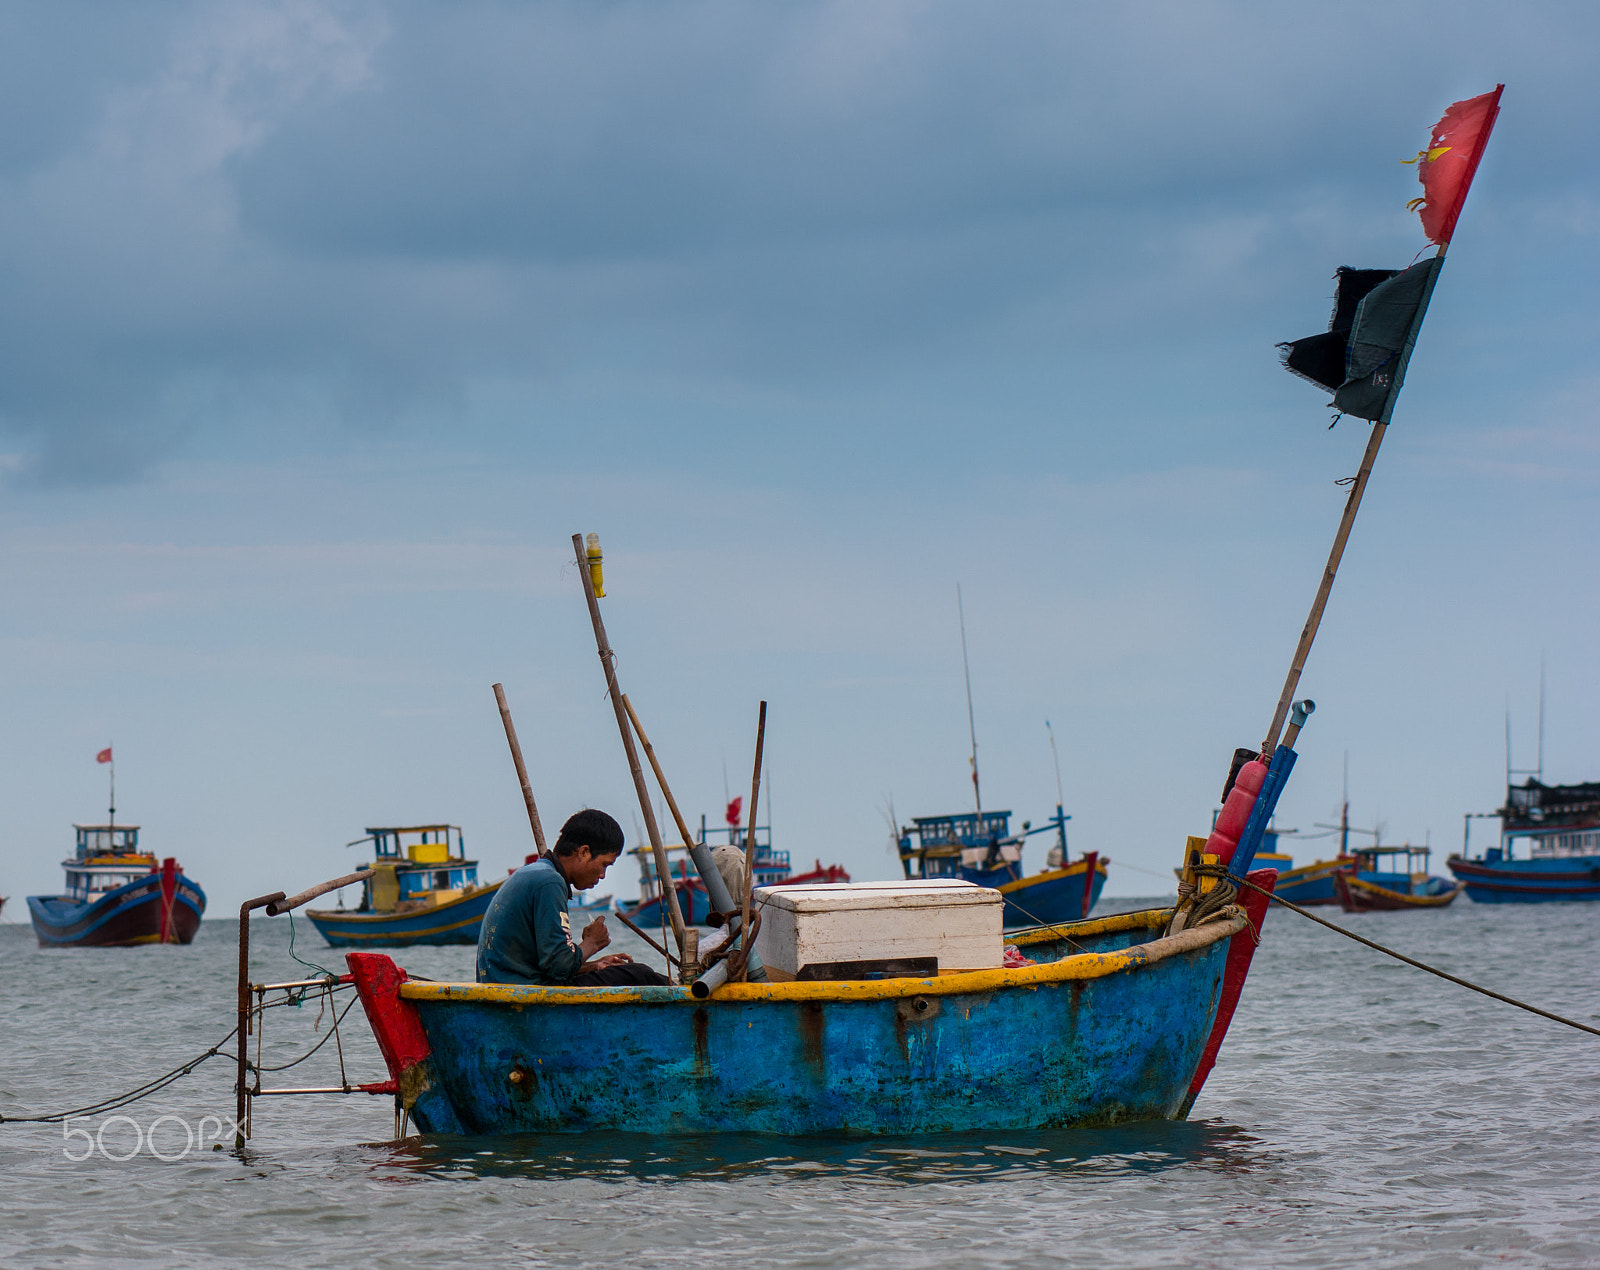 Samsung NX500 + Samsung NX 85mm F1.4 ED SSA sample photo. A fisherman on his boat in vietnam photography